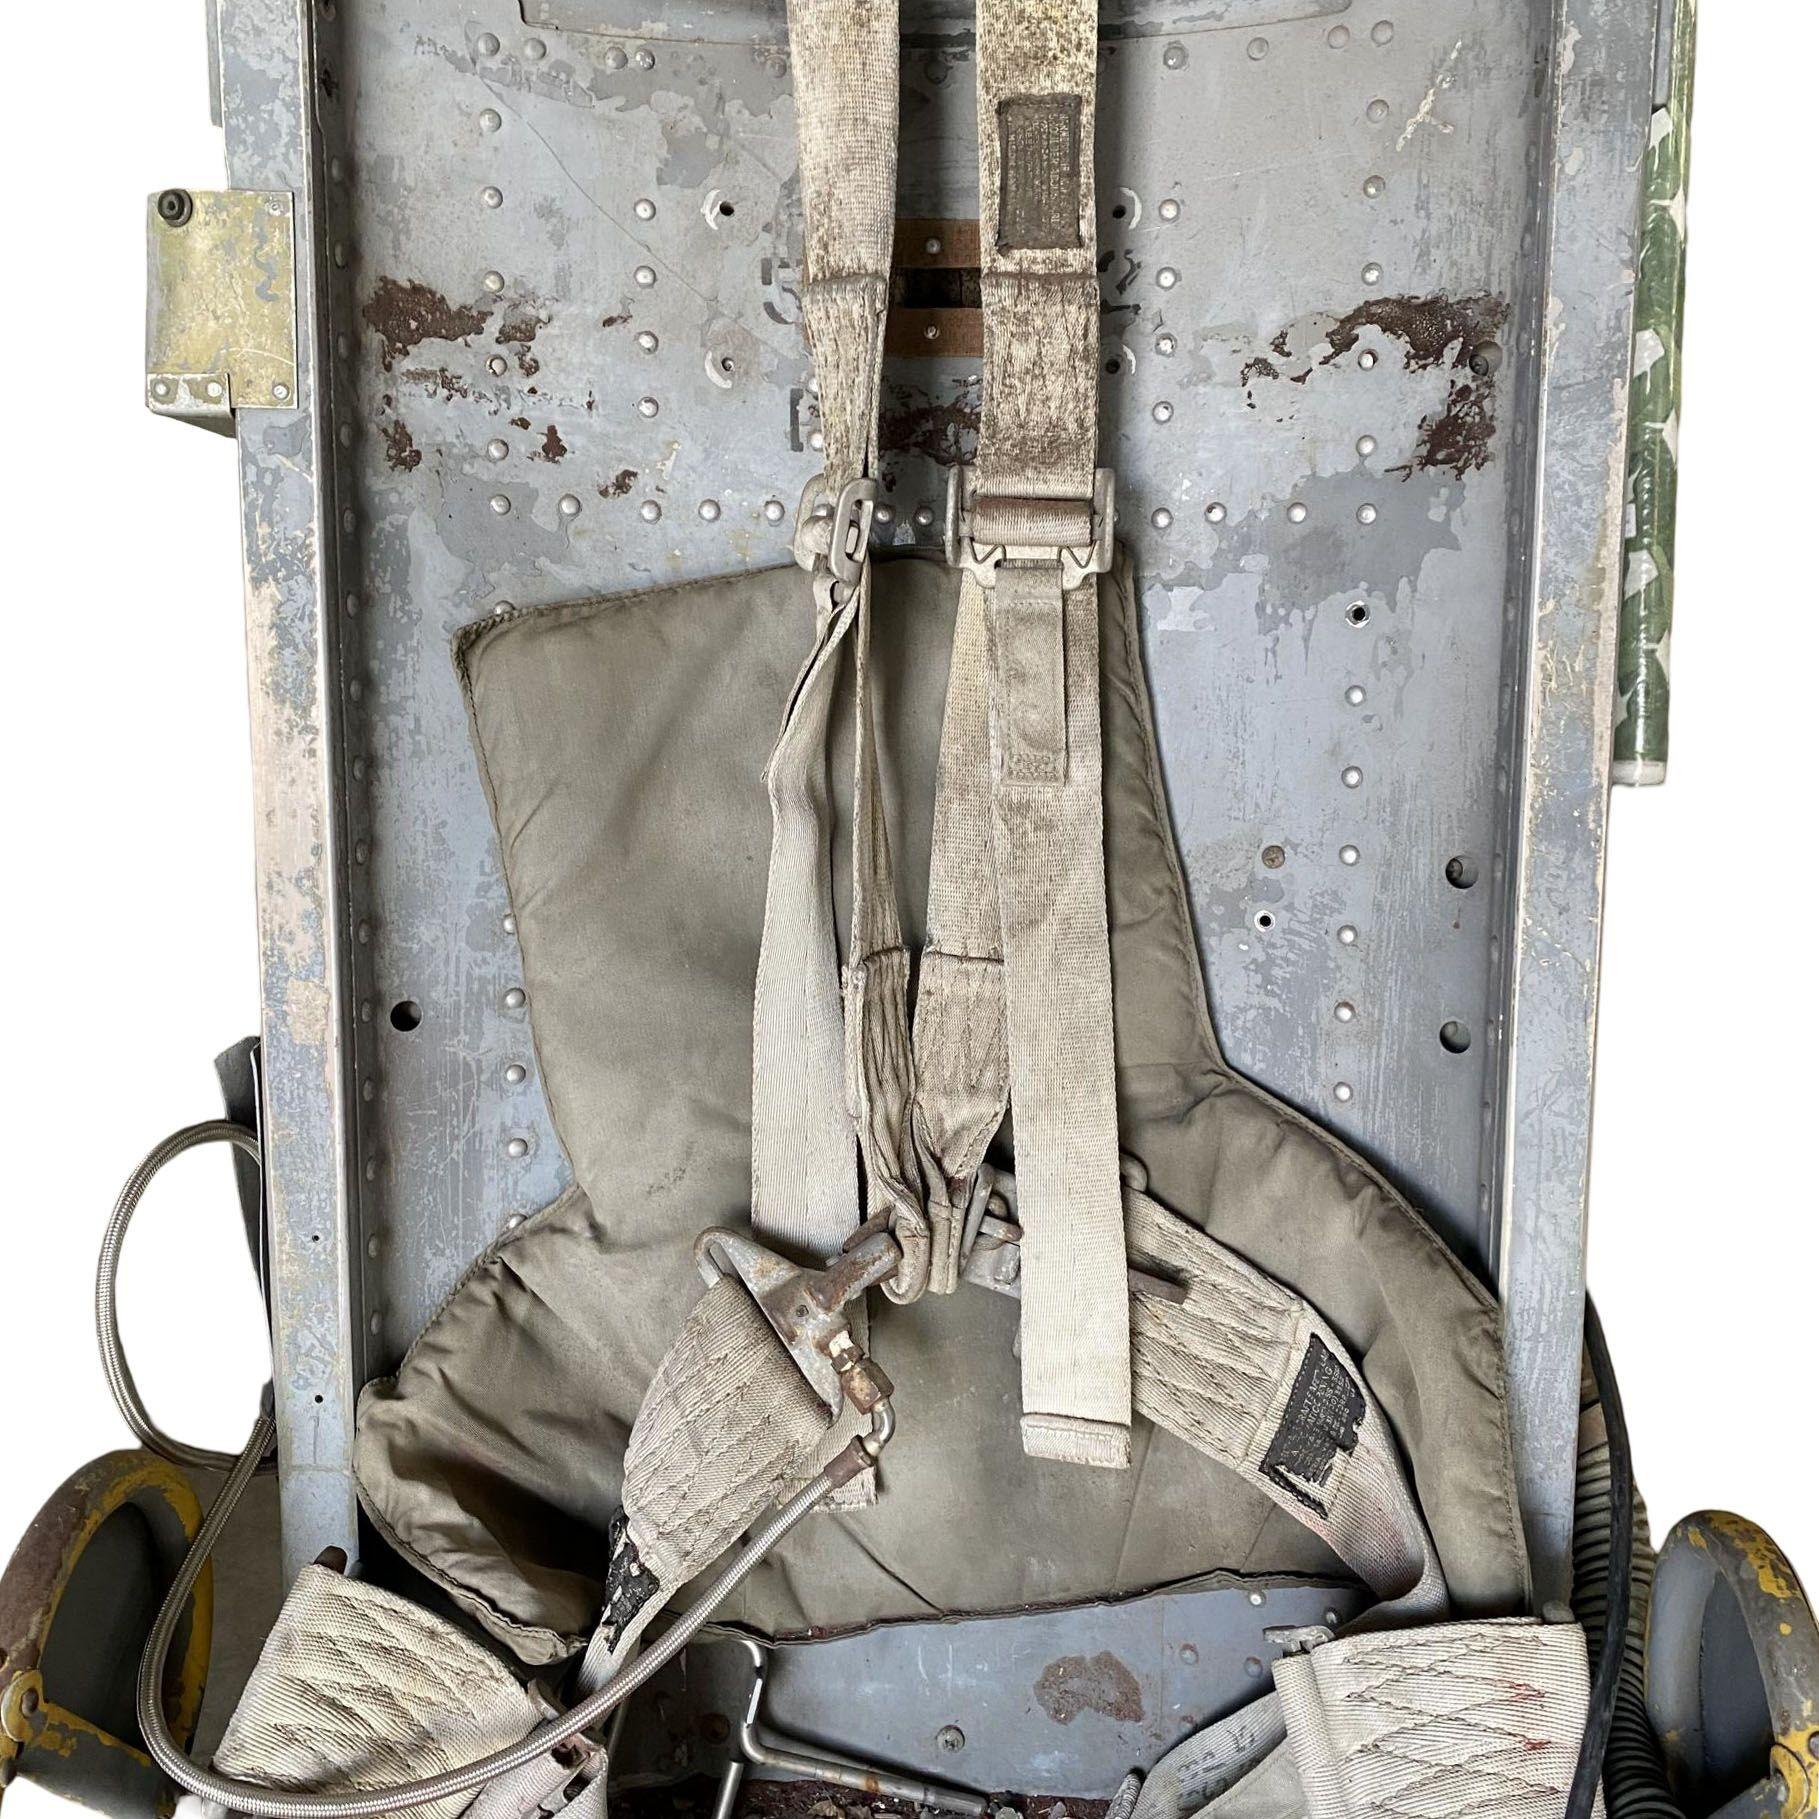 Steel Boeing B-52 Bombardier's Ejection Seat For Lower Deck For Sale